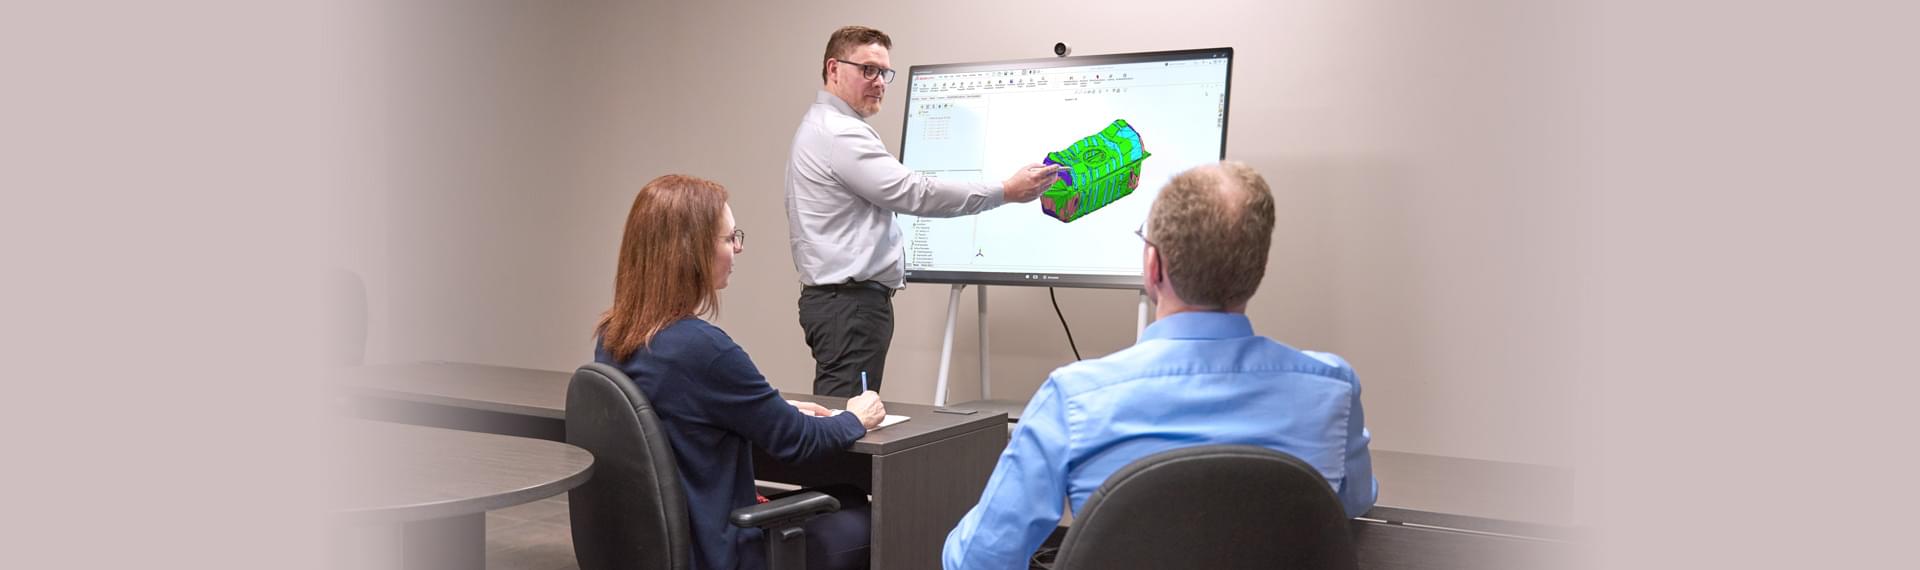 Three Spectra Premium engineers discussing the design of fuel delivery reservoirs on interactive computer